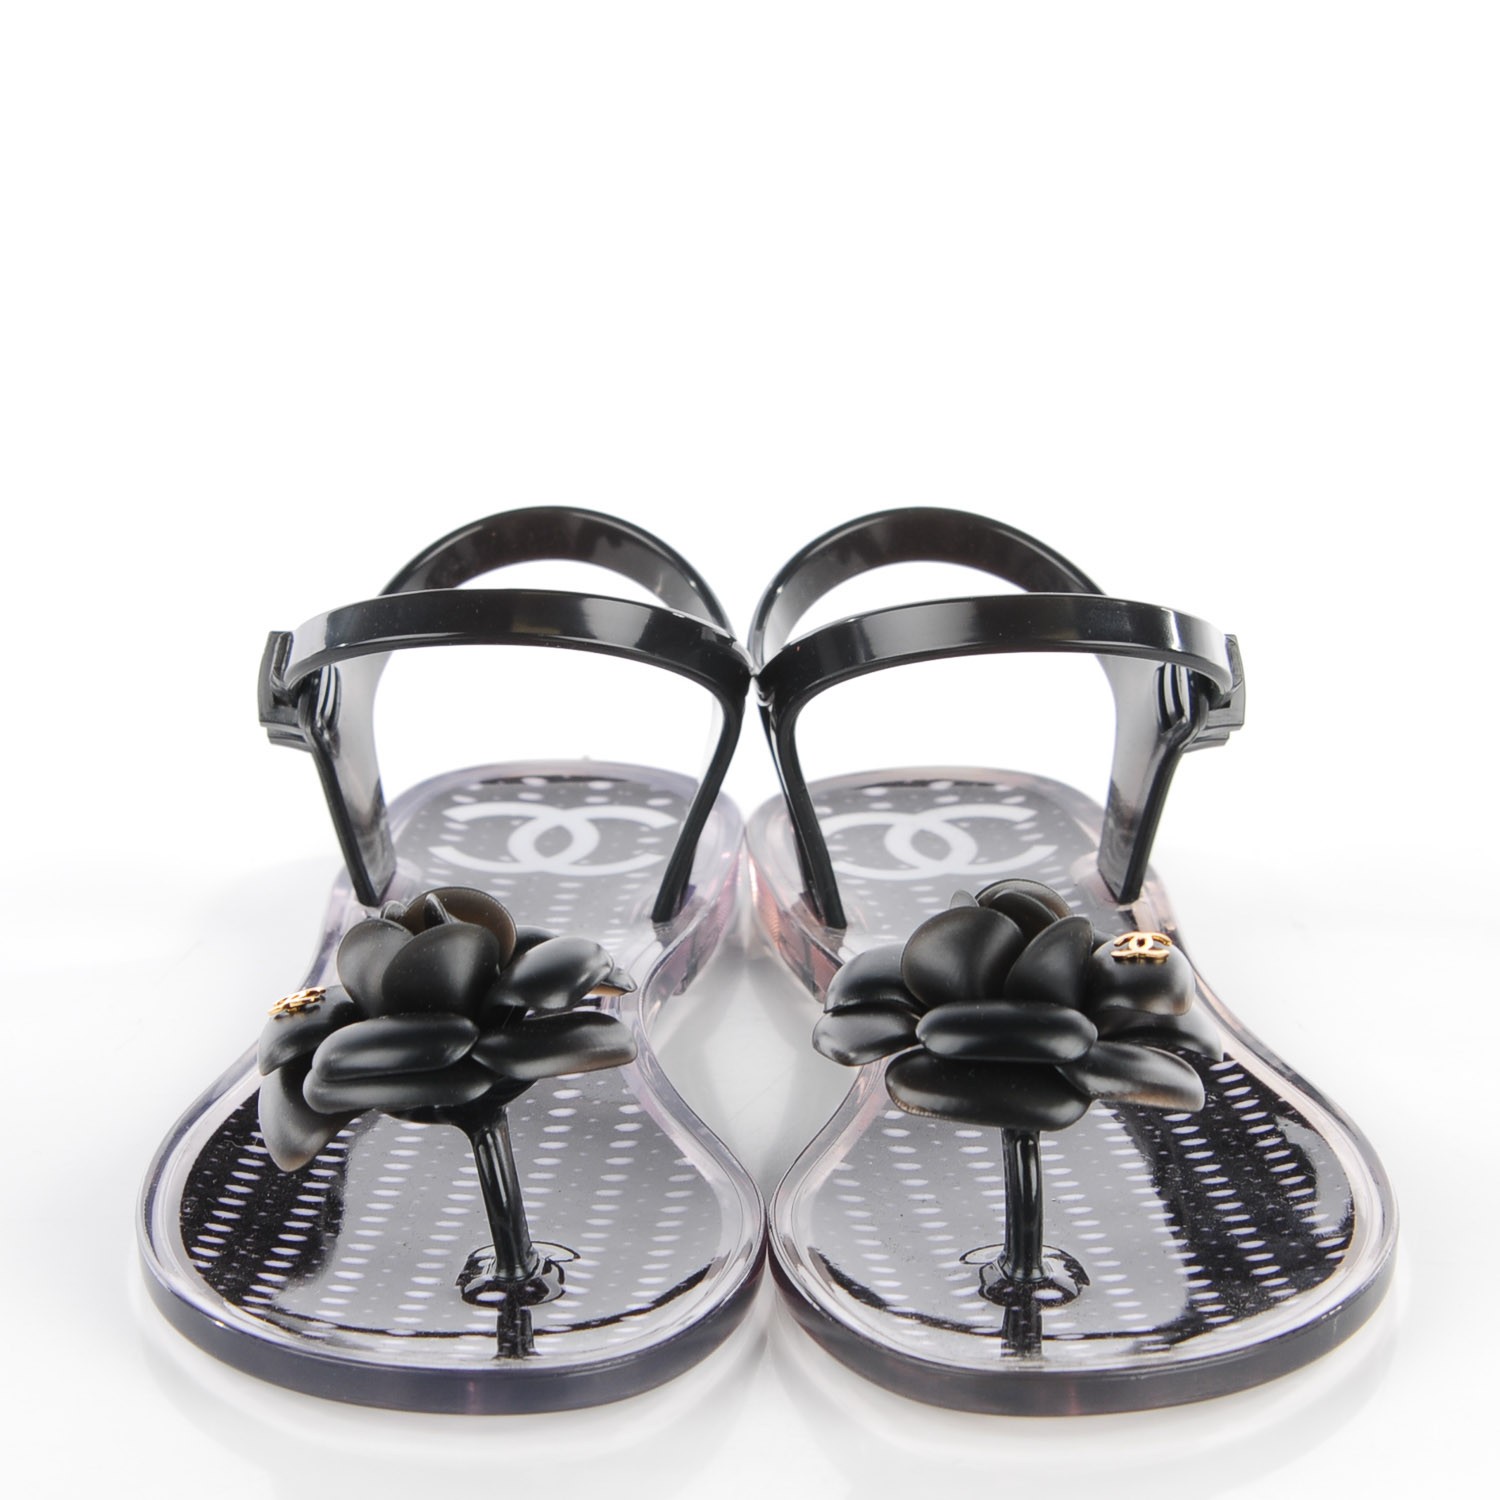 CHANEL Jelly Camellia Thong Sandals 36 Black 116167